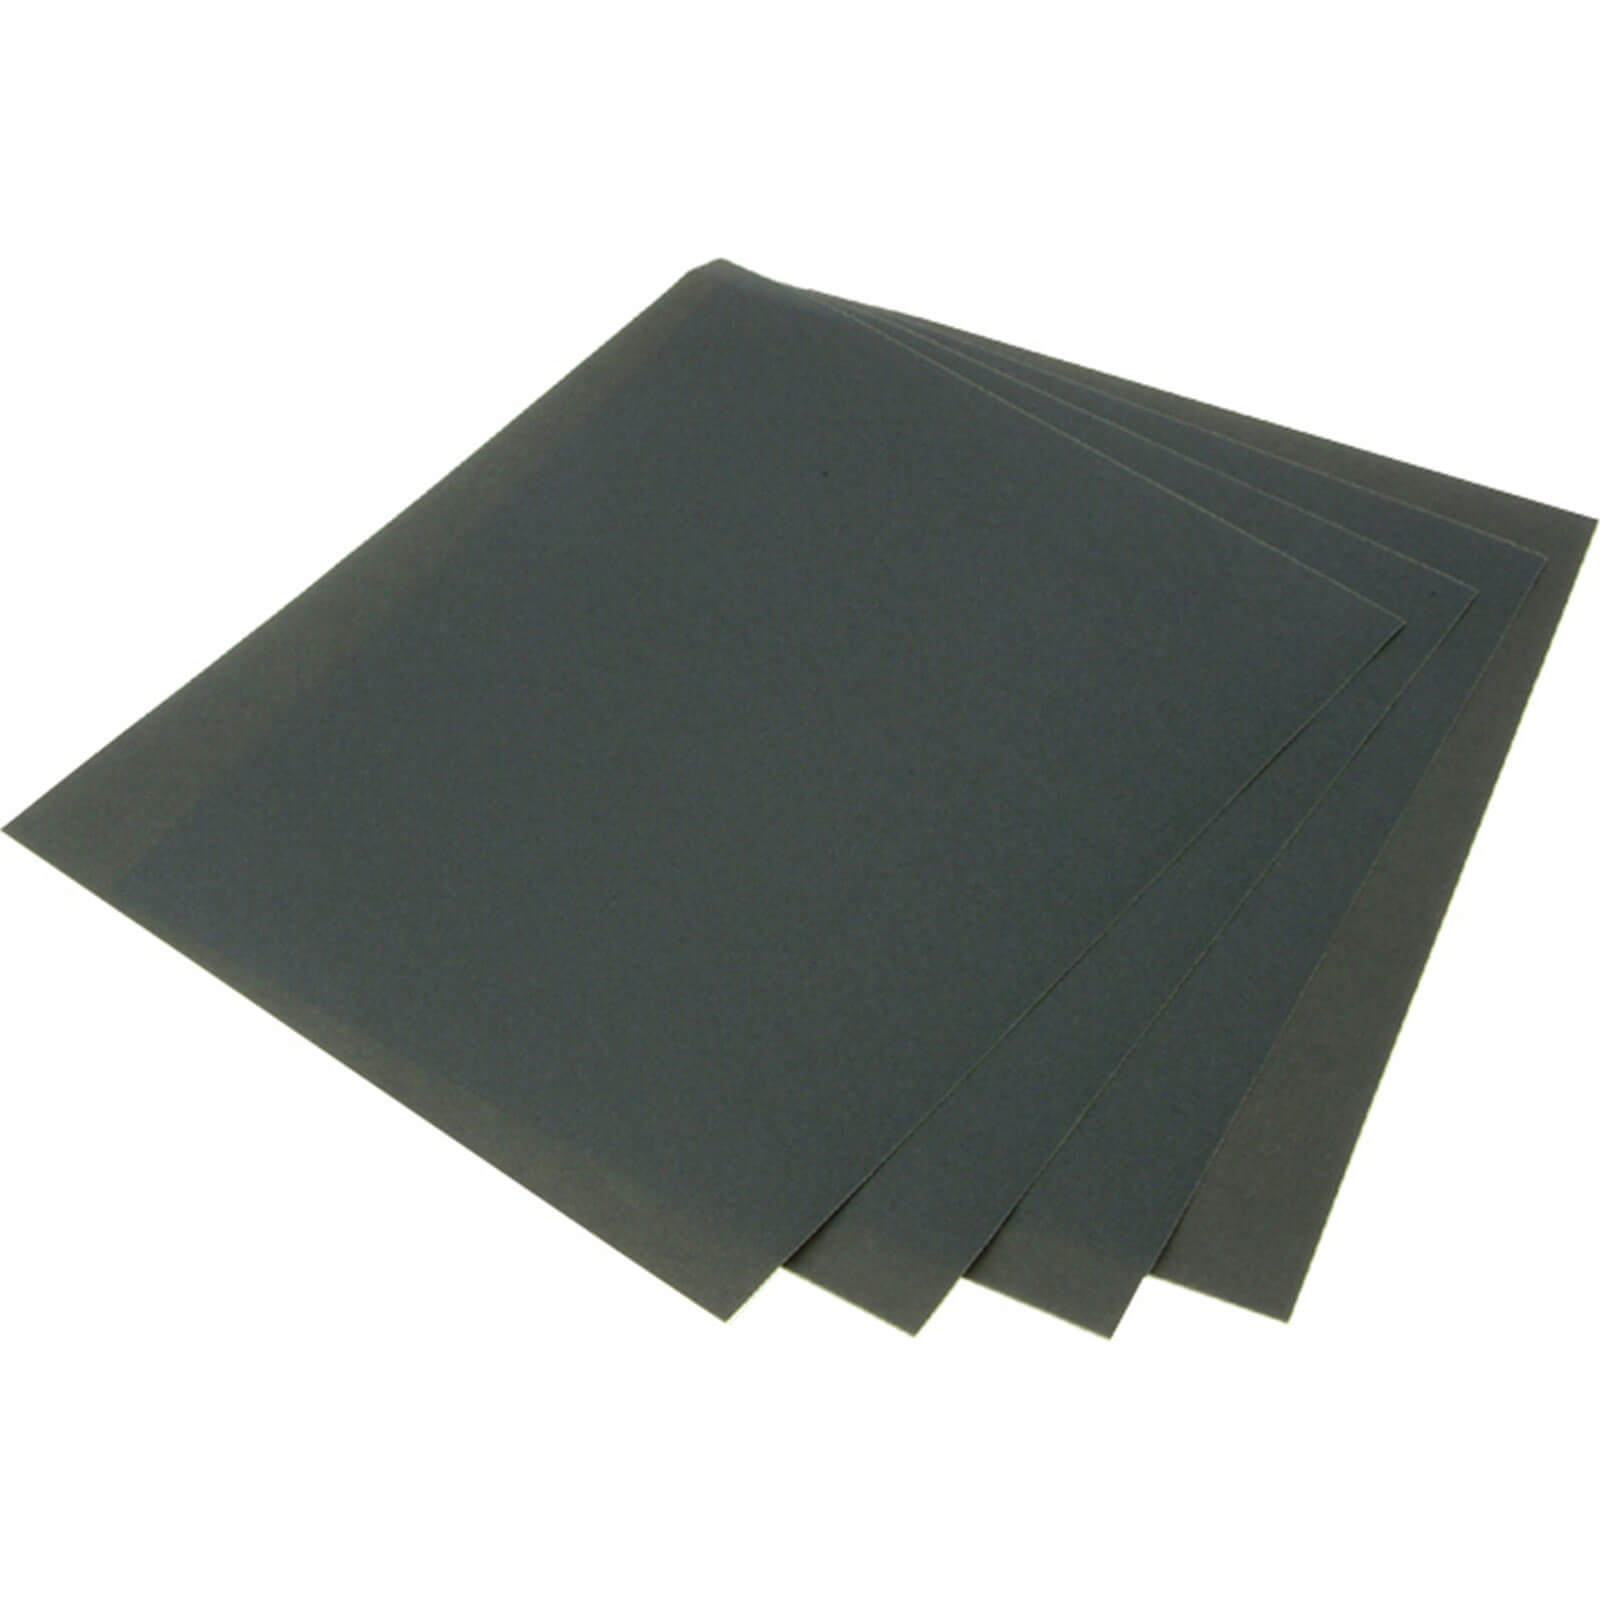 Image of Faithfull Wet and Dry Paper Sheets 230 x 280mm 60g Pack of 25